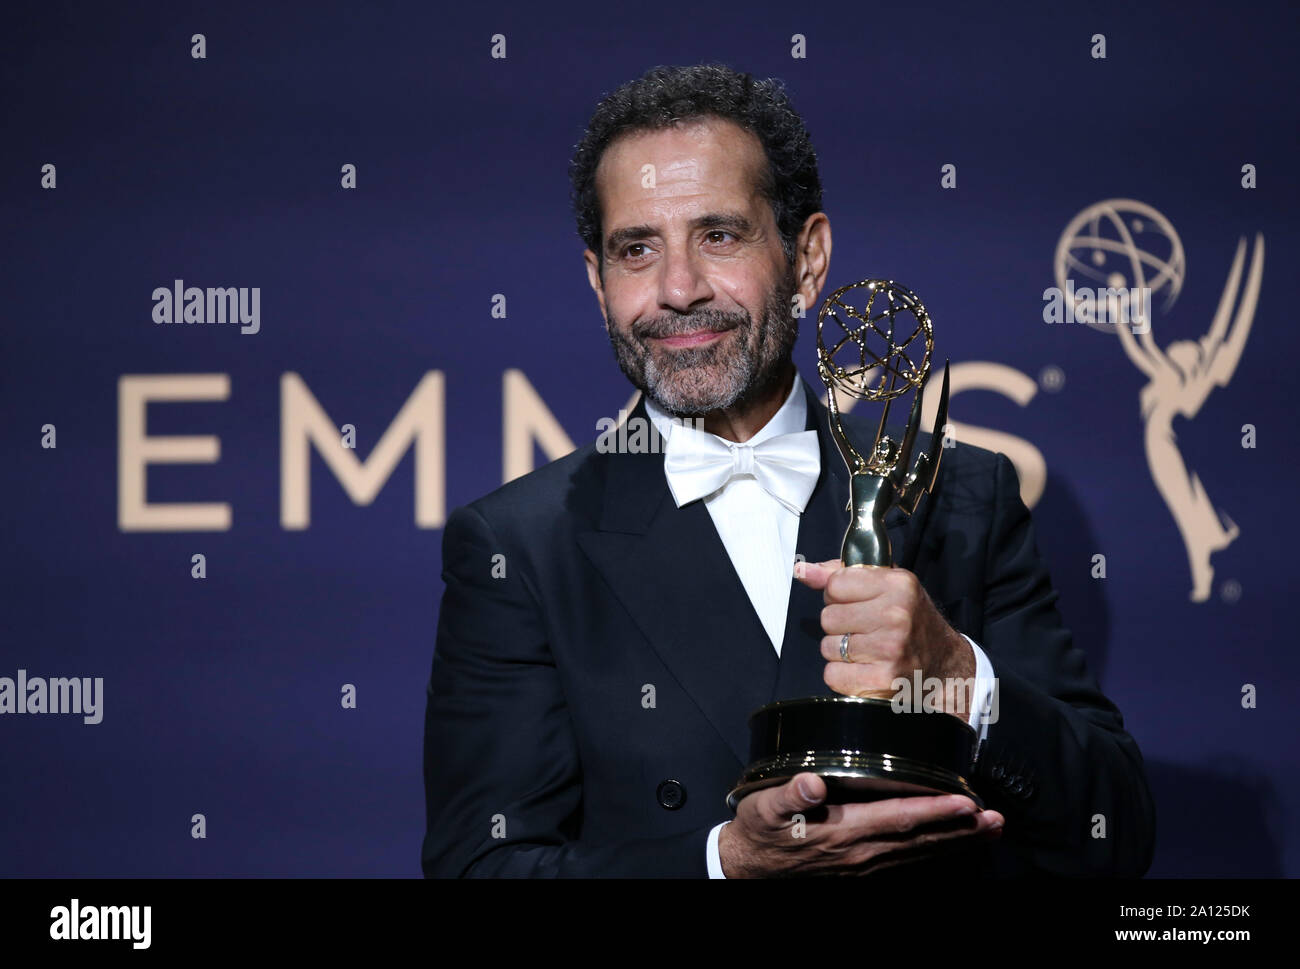 Los Angeles, USA. 22nd Sep, 2019. Actor Tony Shalhoub poses with the award for outstanding supporting actor in a comedy series for 'The Marvelous Mrs. Maisel' during the 71st Primetime Emmy Awards in Los Angeles, the United States, Sept. 22, 2019. Credit: Li Ying/Xinhua/Alamy Live News Stock Photo